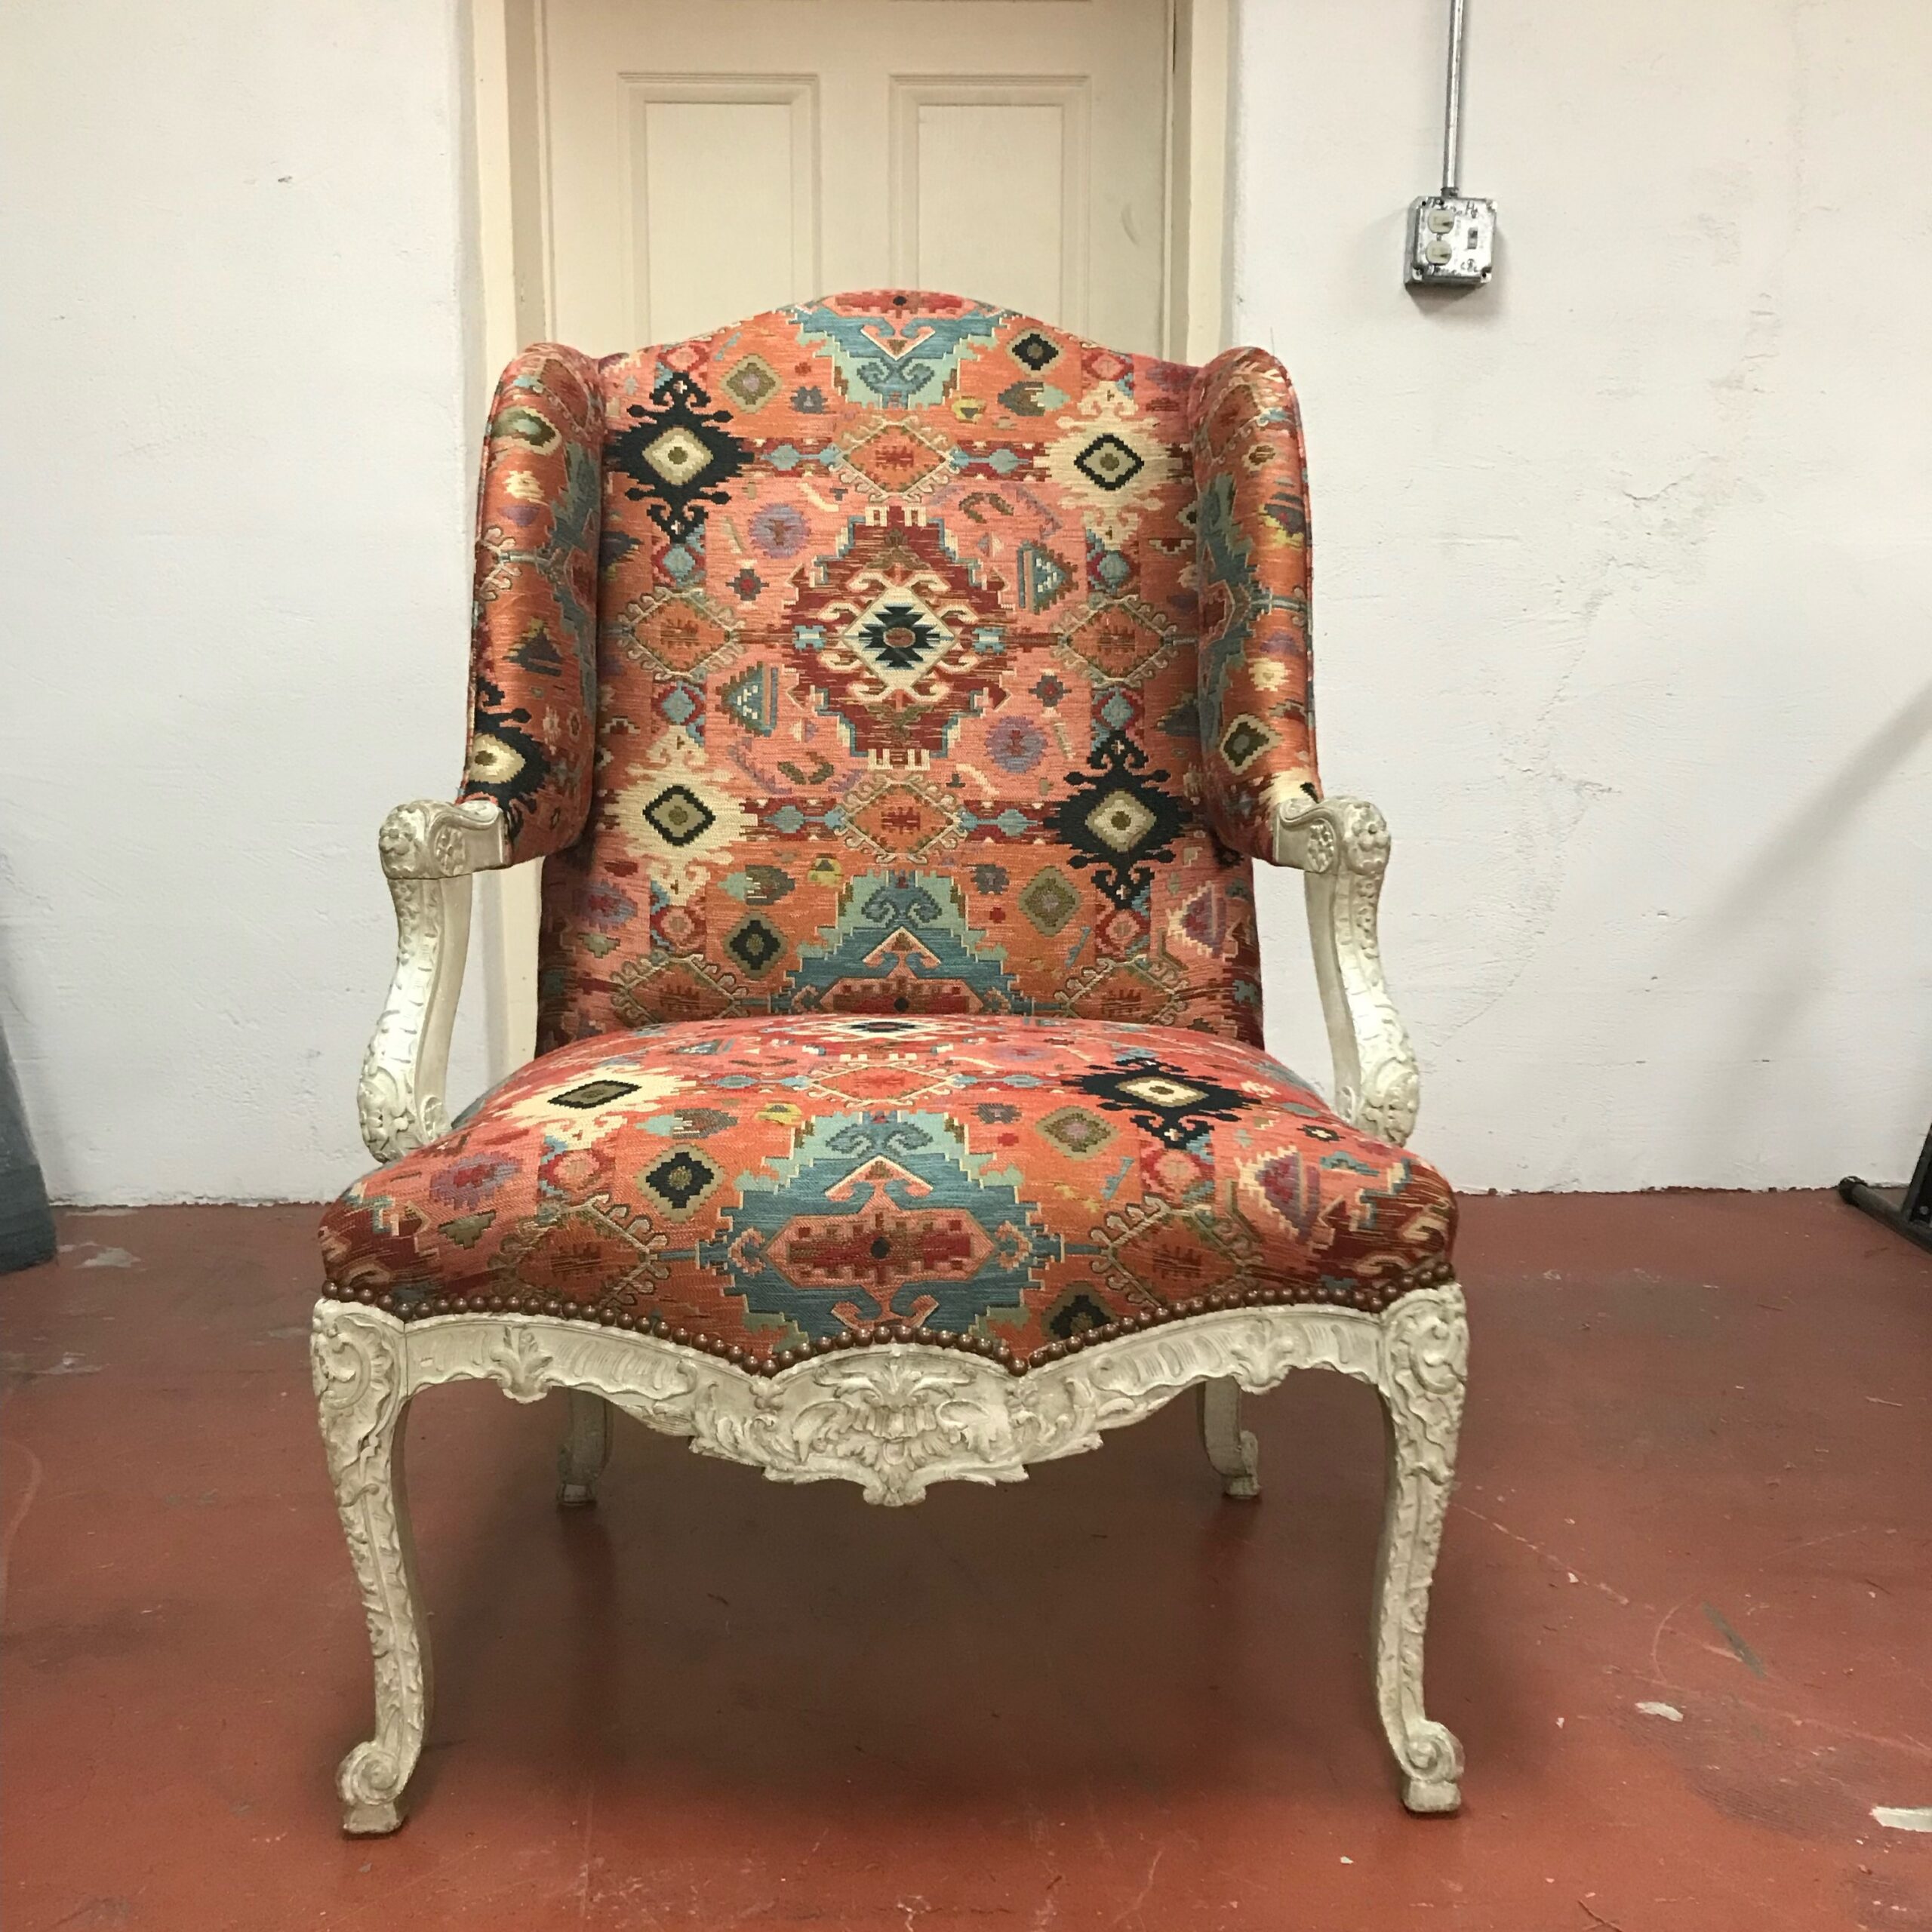 Reupholster chairs and revamp furniture with Fabrics That Go